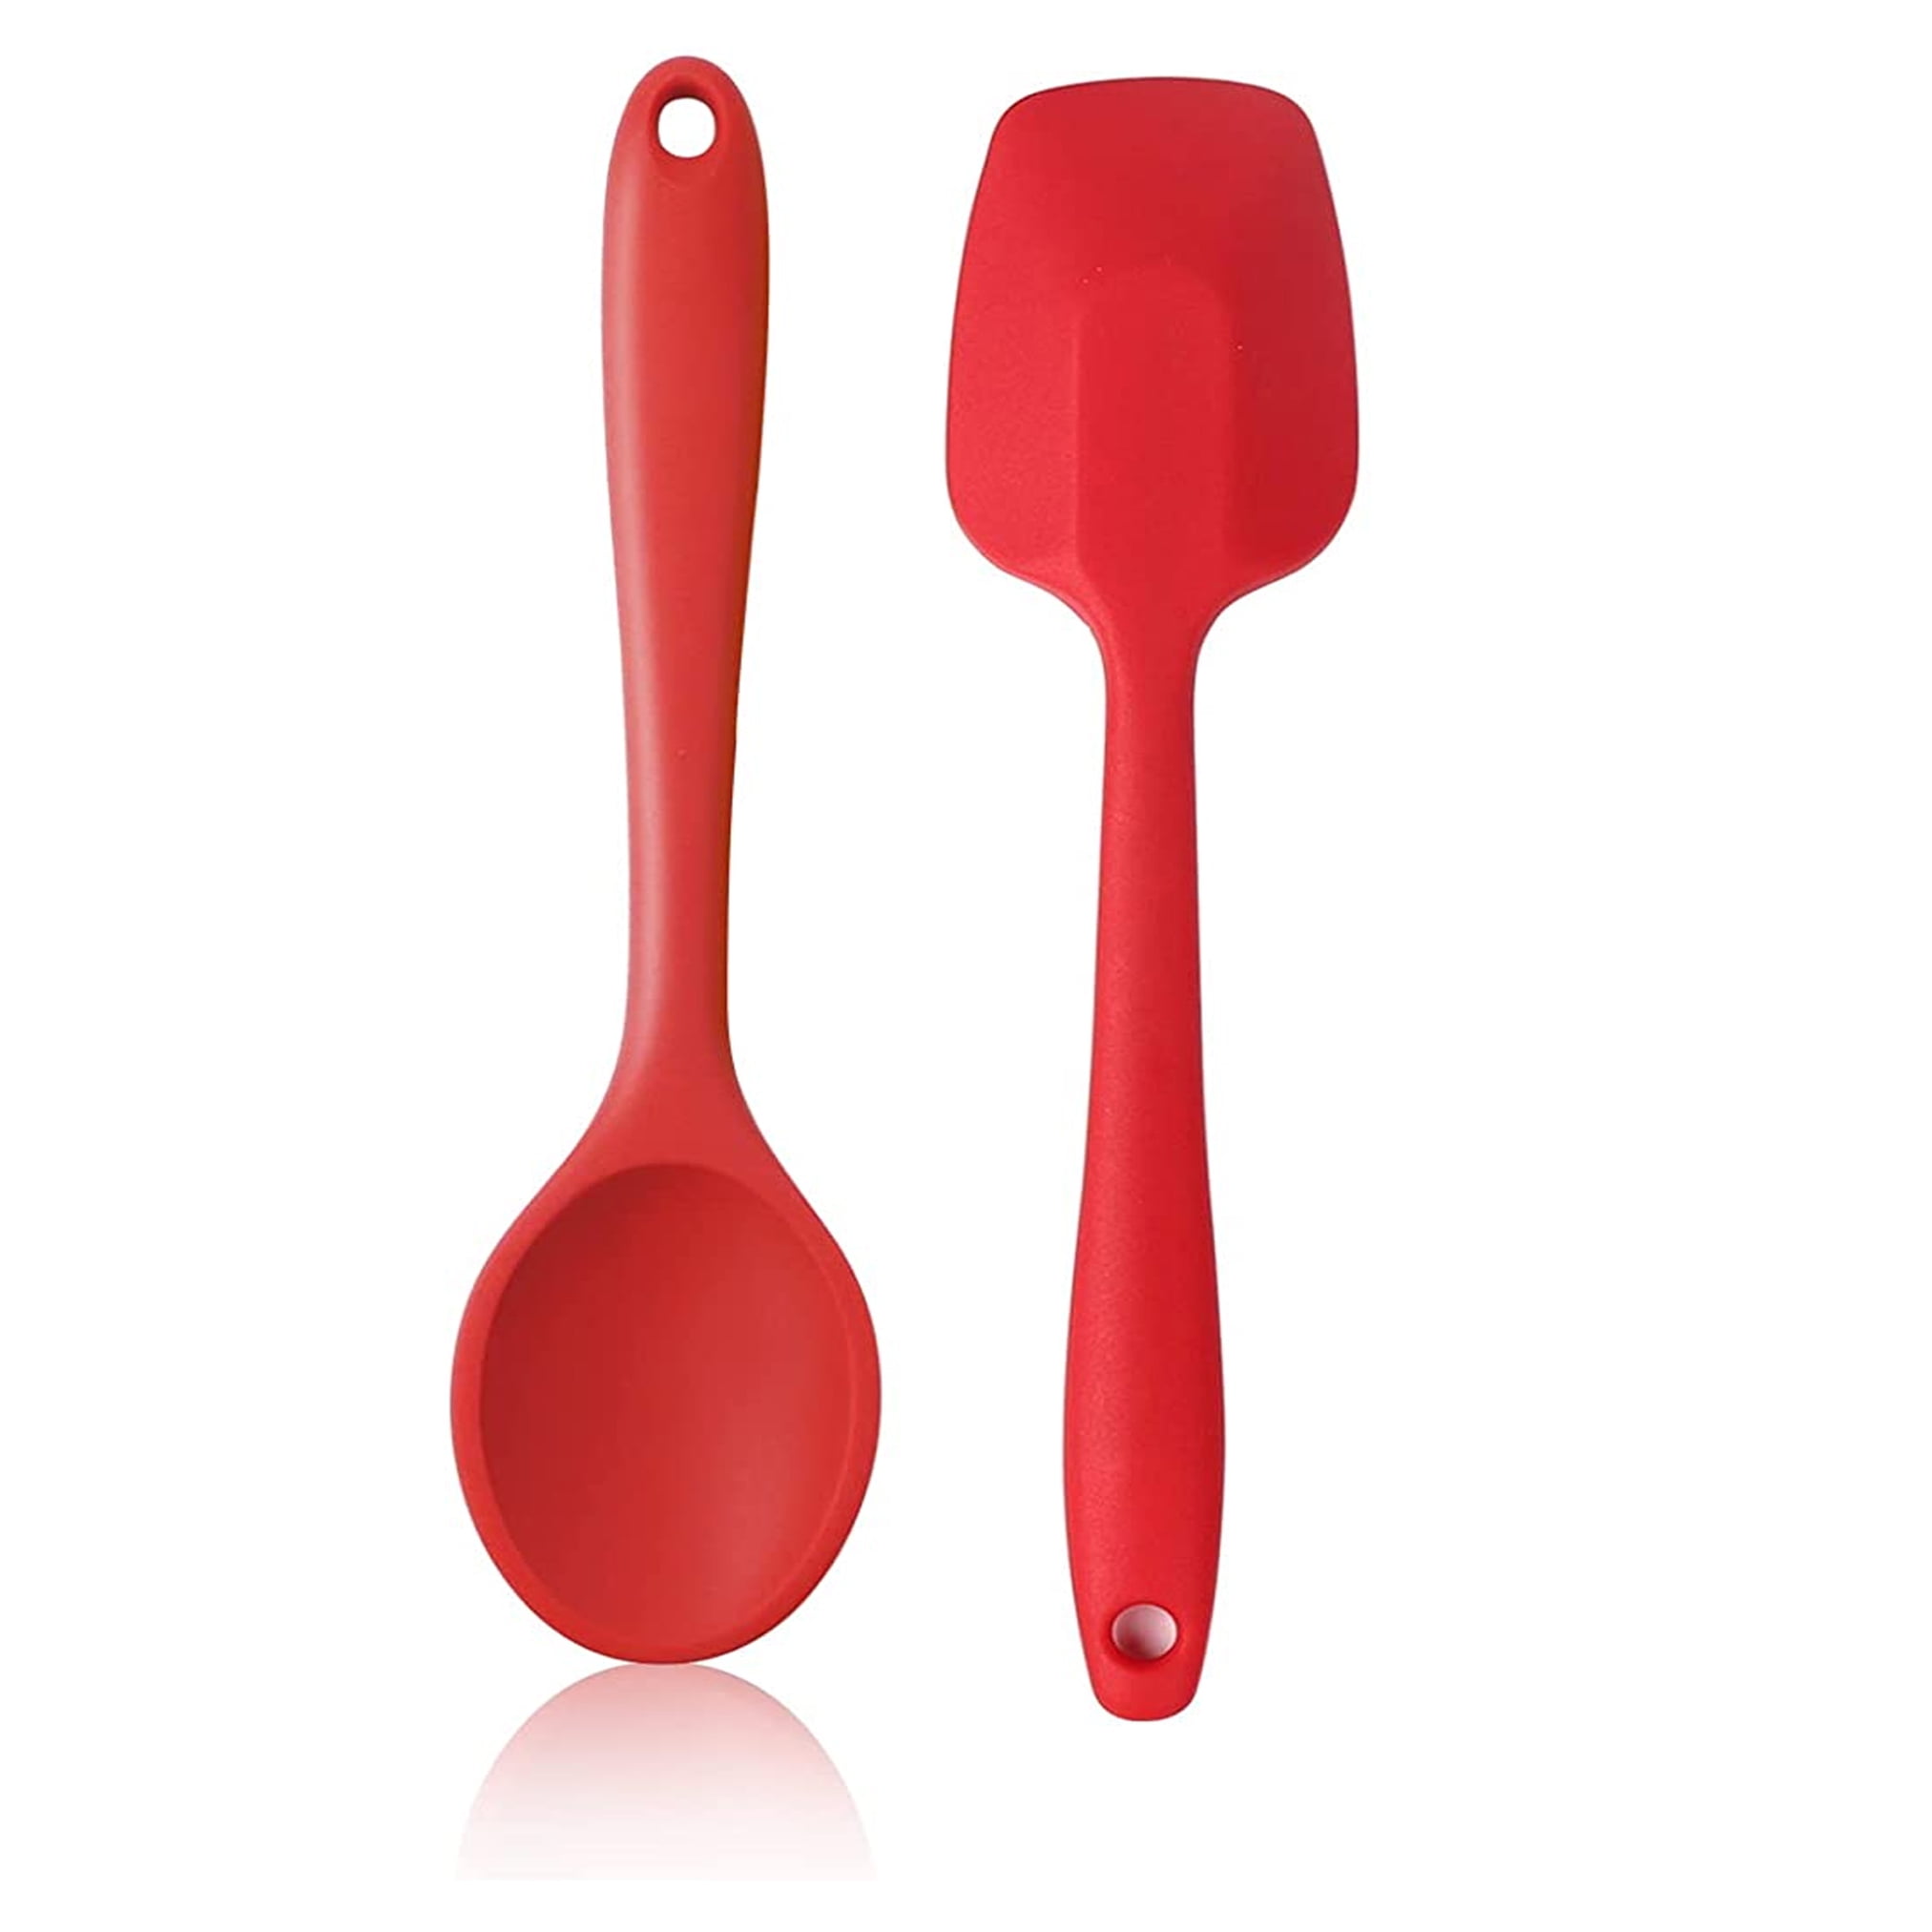 Costco Is Selling an 8-Piece Silicone Utensil Set for Less Than $15 - Parade